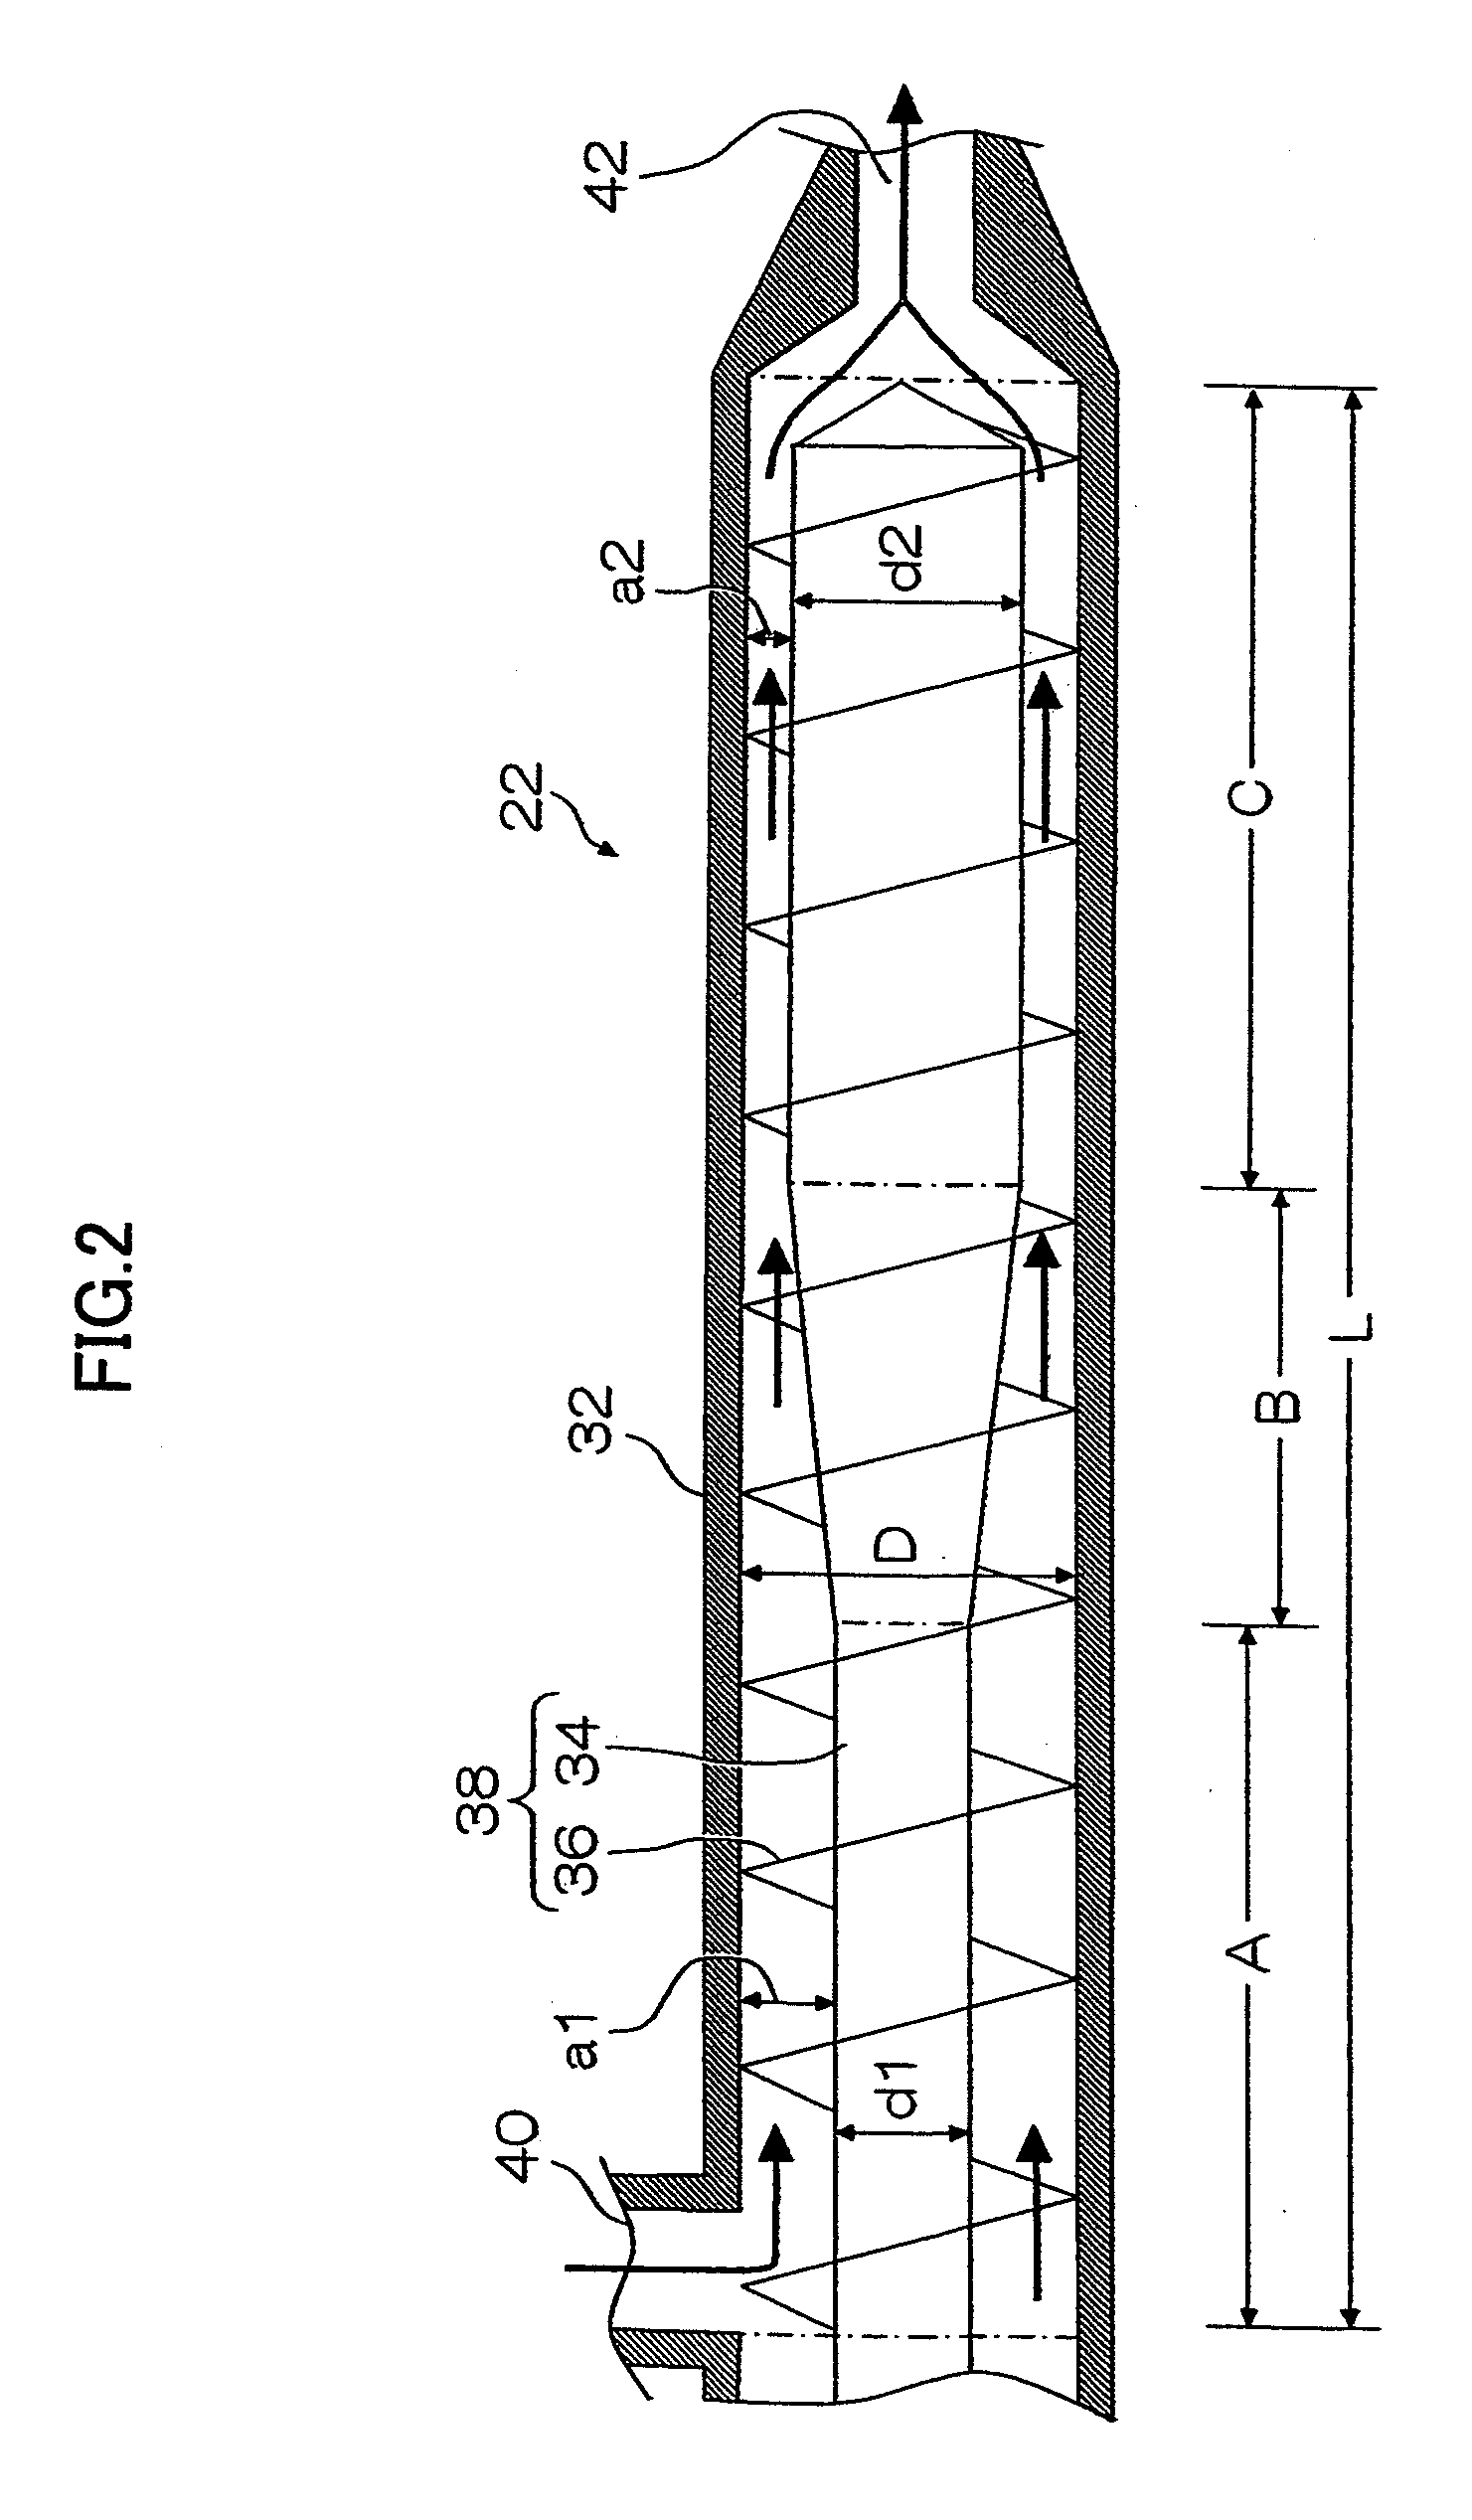 Thermoplastic resin film and method for producing the same